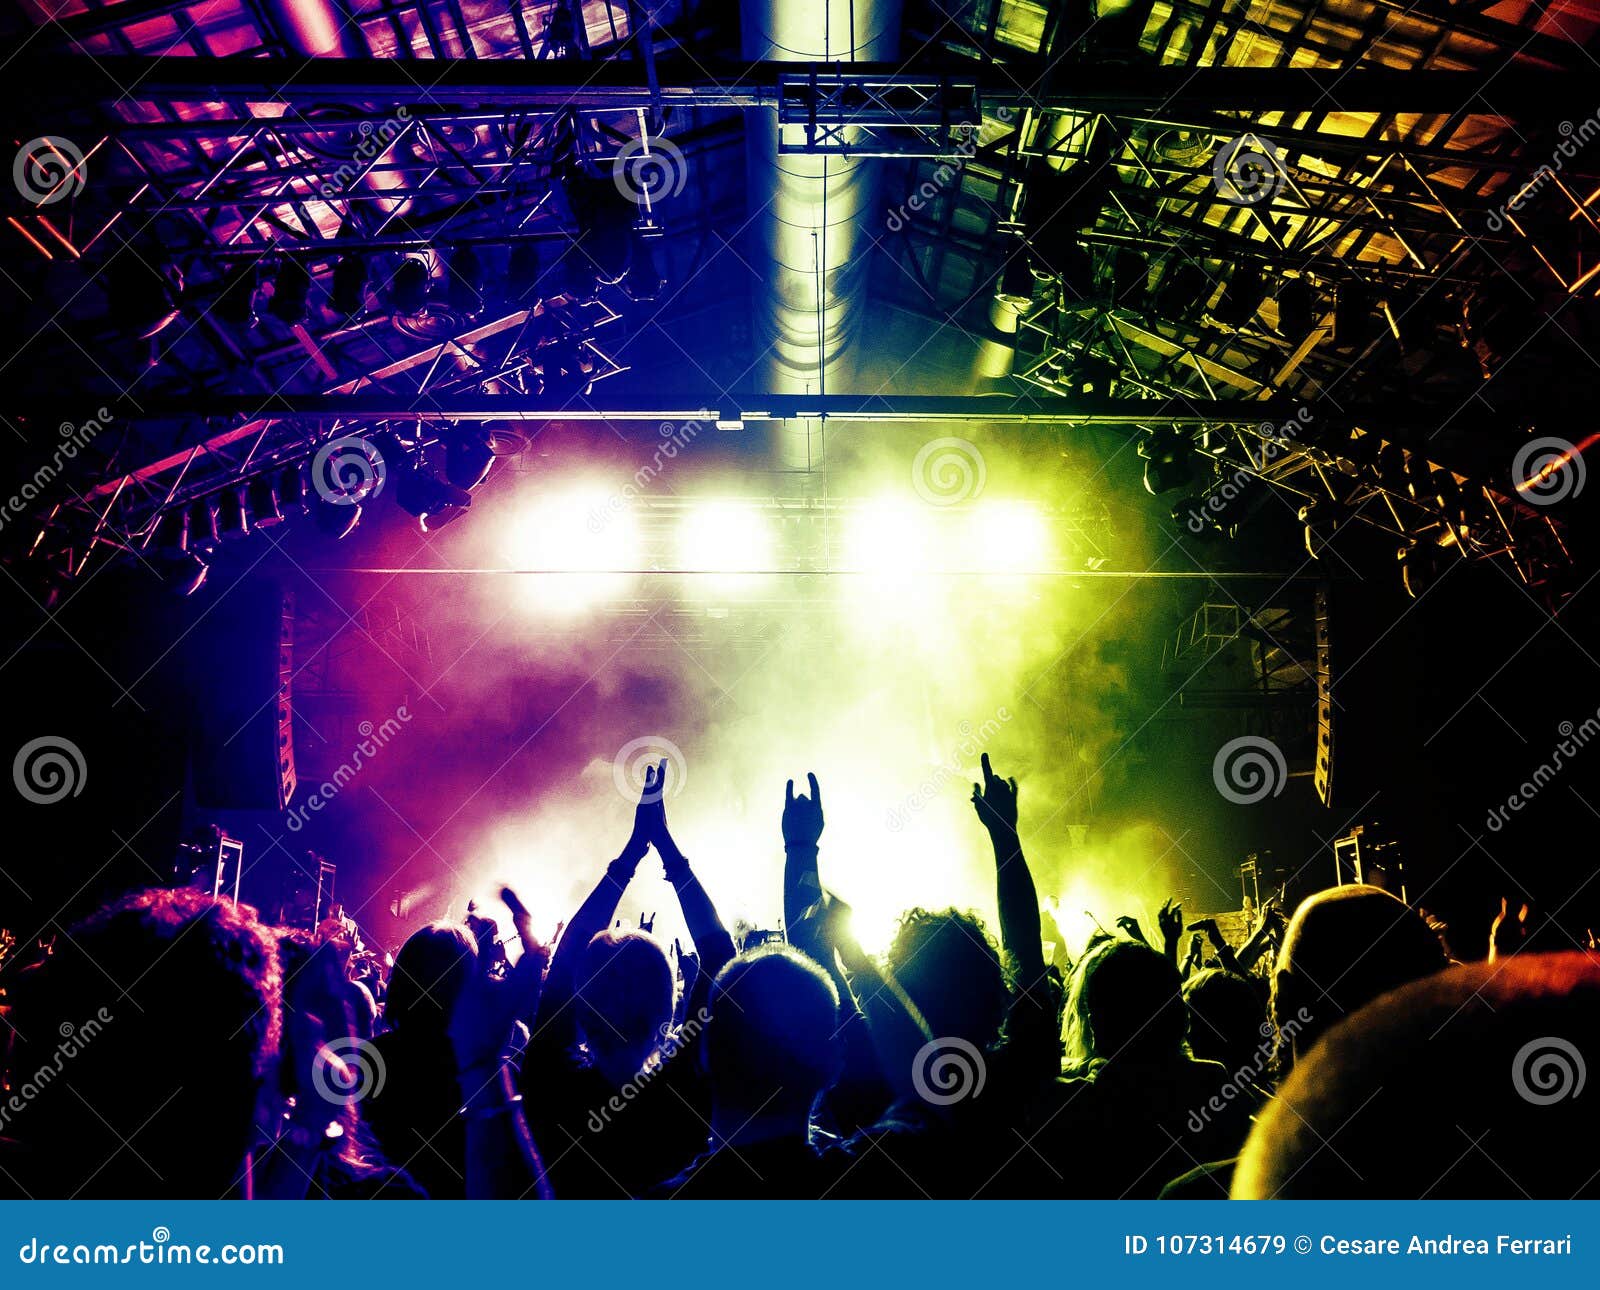 Colourful Stage with Dancing Fans Editorial Stock Image of rock, 107314679